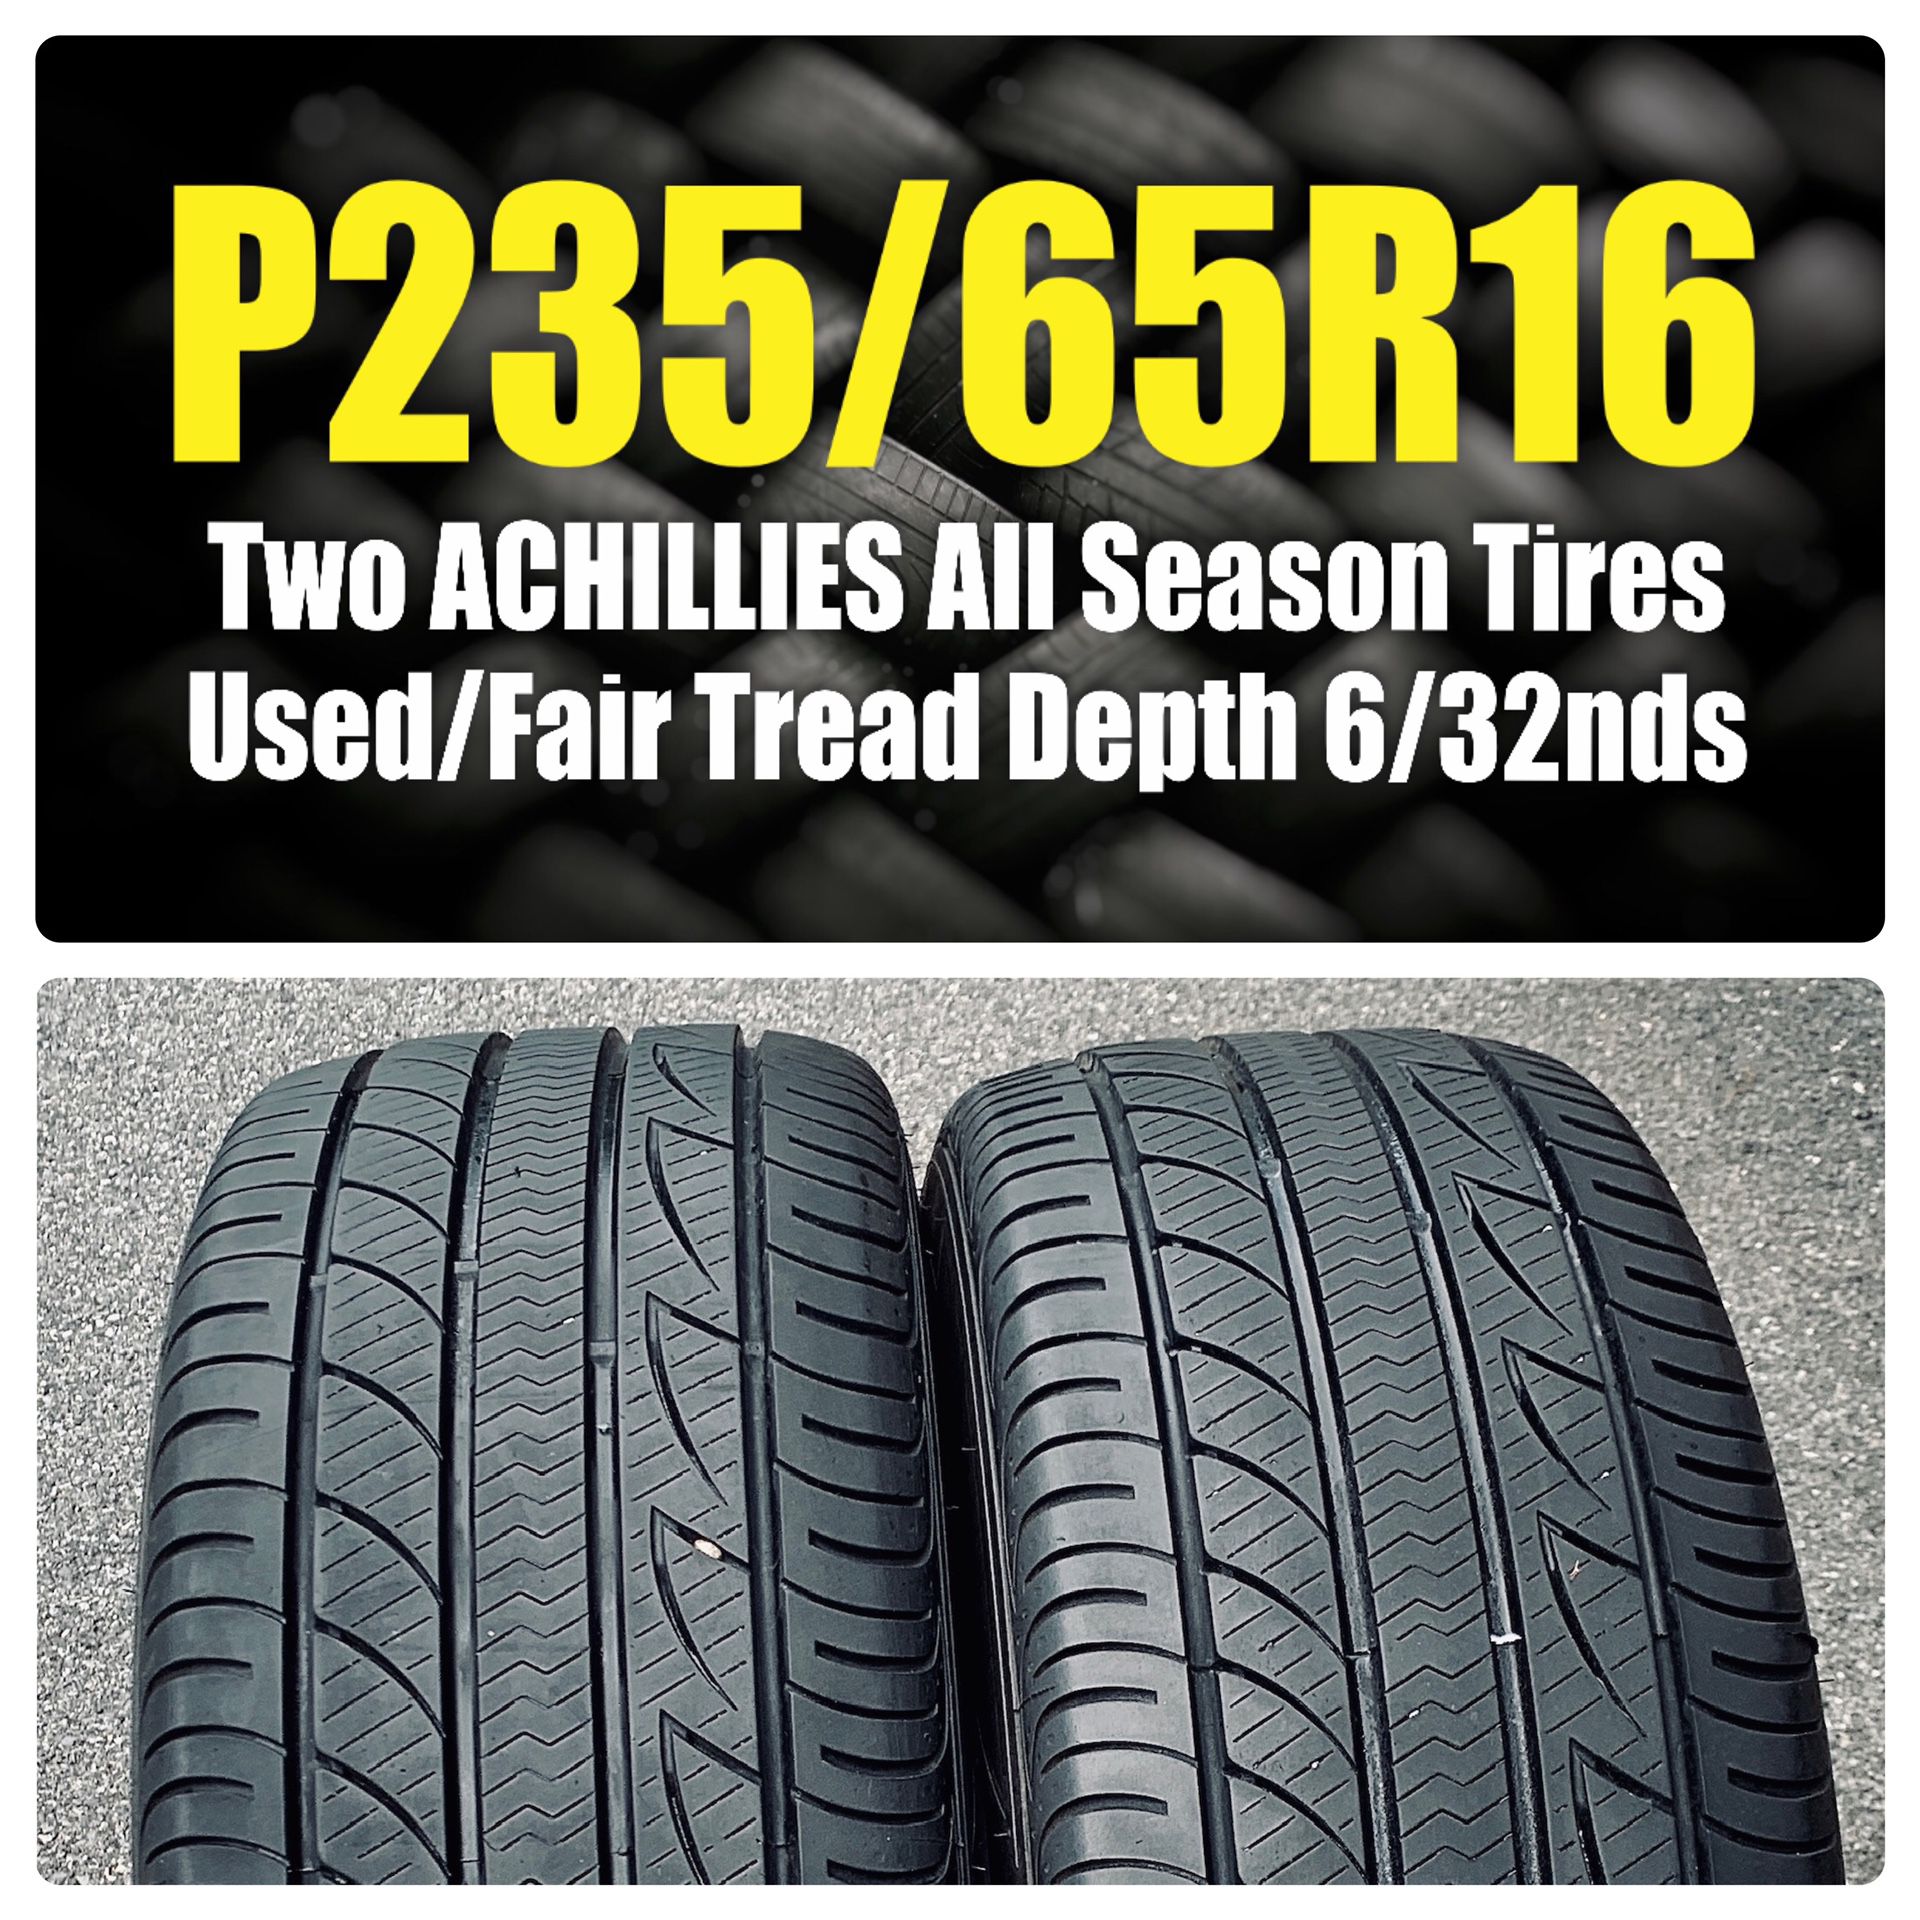 P235/65R16 - Used Tires 